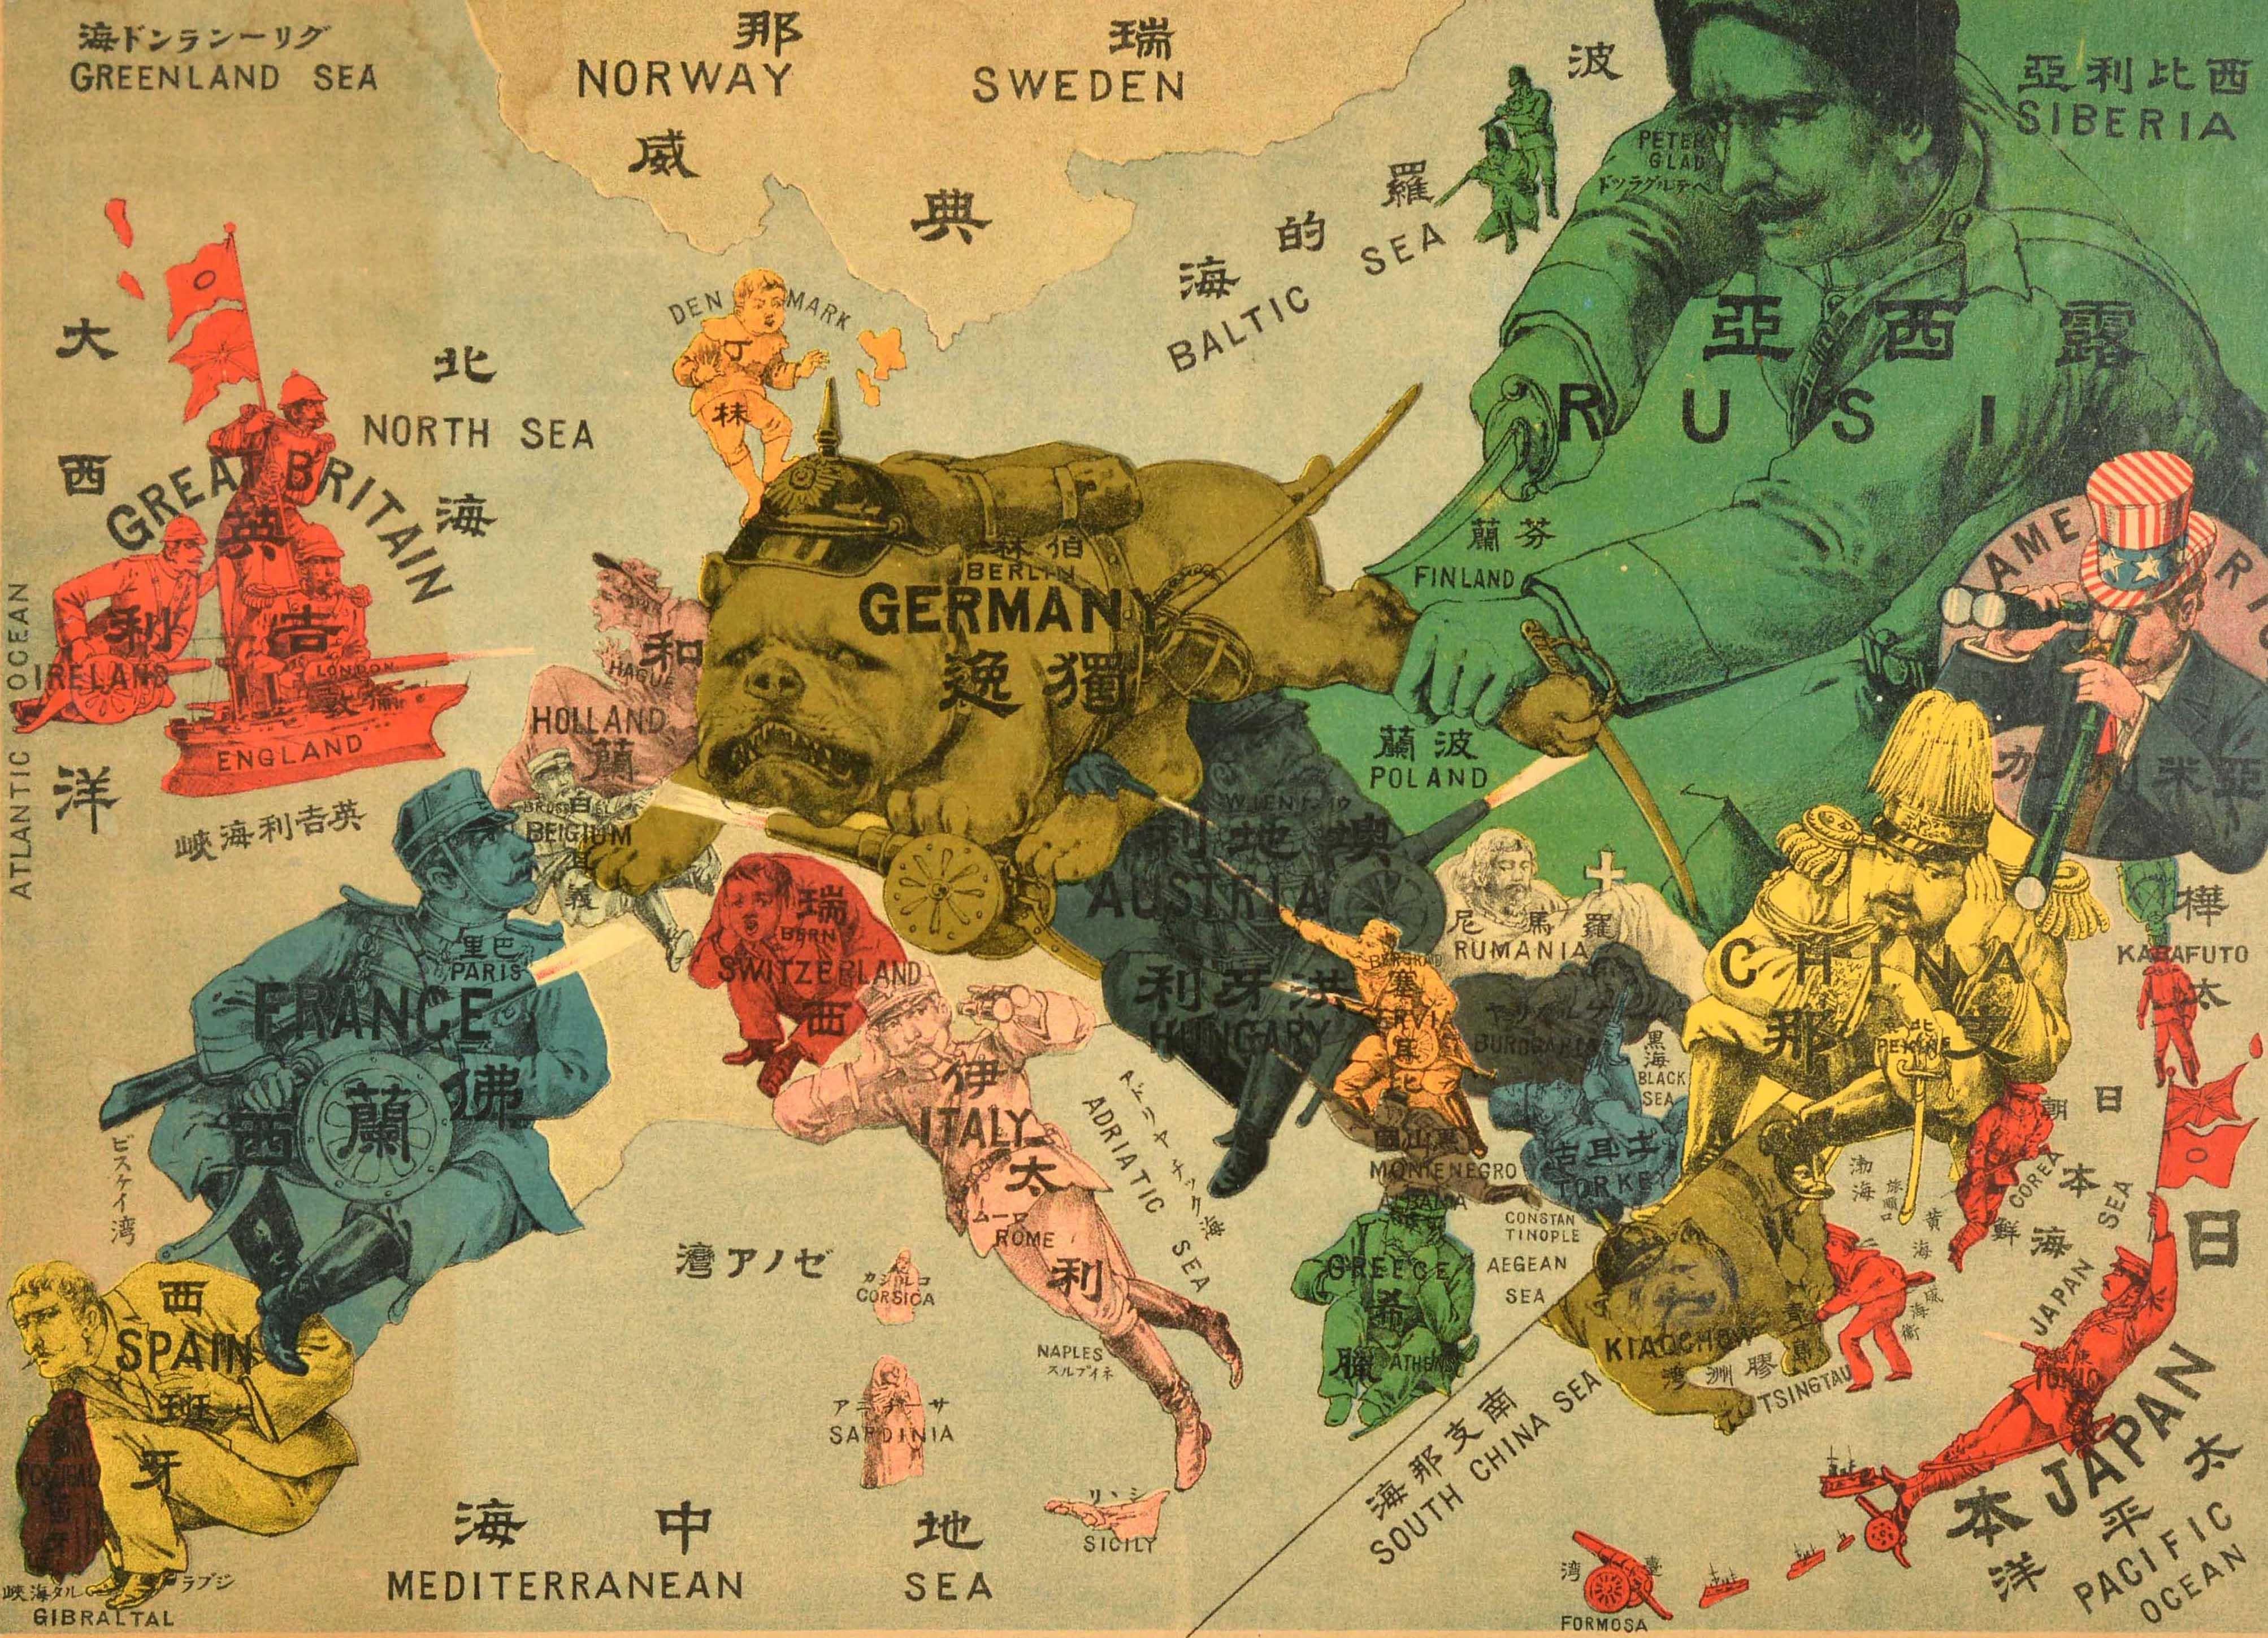 Original antique World War One satirical map of Europe and Asia portraying the outbreak of WWI featuring colourful caricatures and illustrations of the countries including Germany as a bulldog in a spiked helmet crushing Belgium with its paw, Great